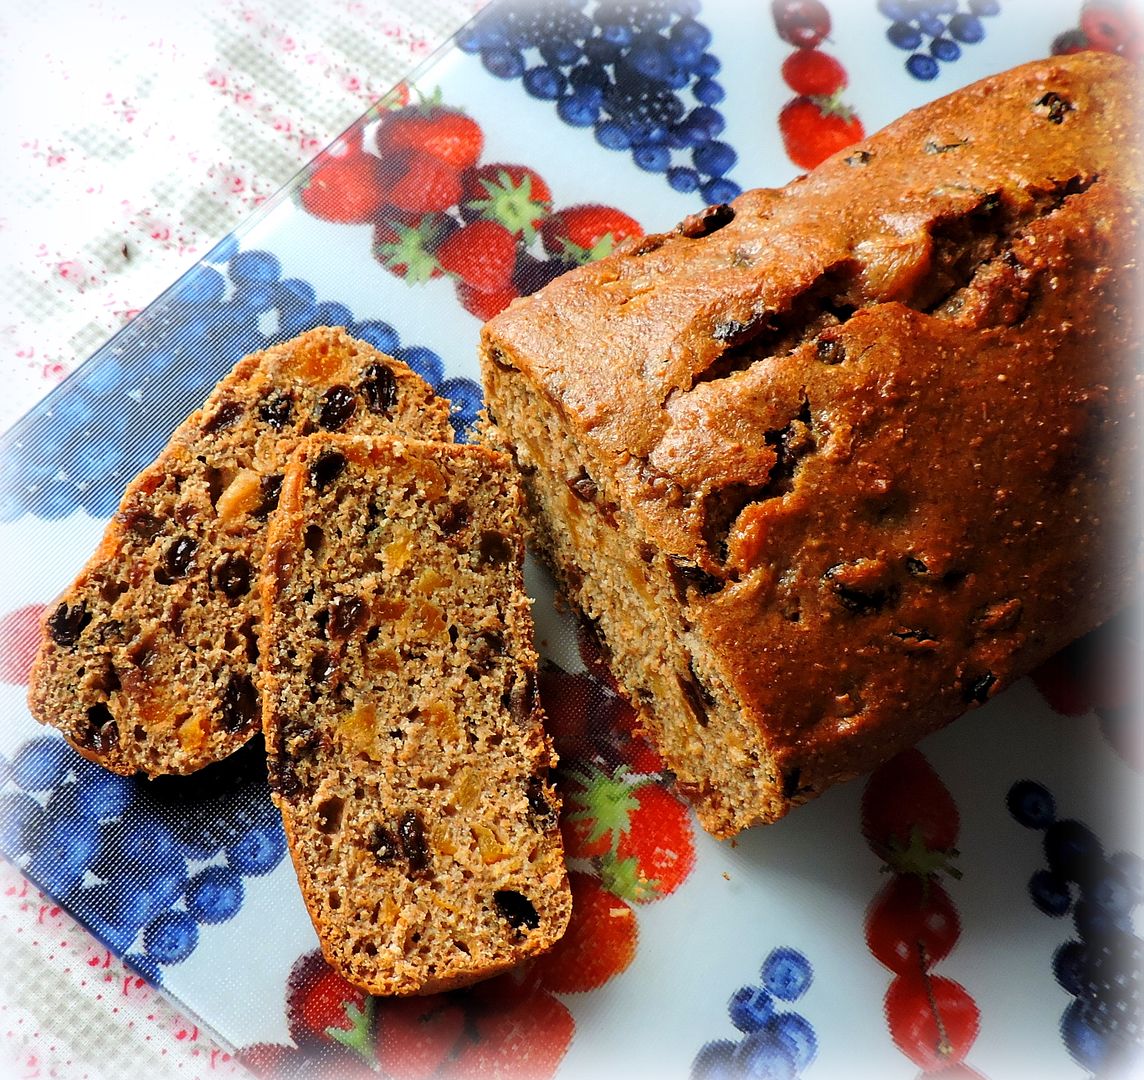 Apricot and Raisin Bran Loaf